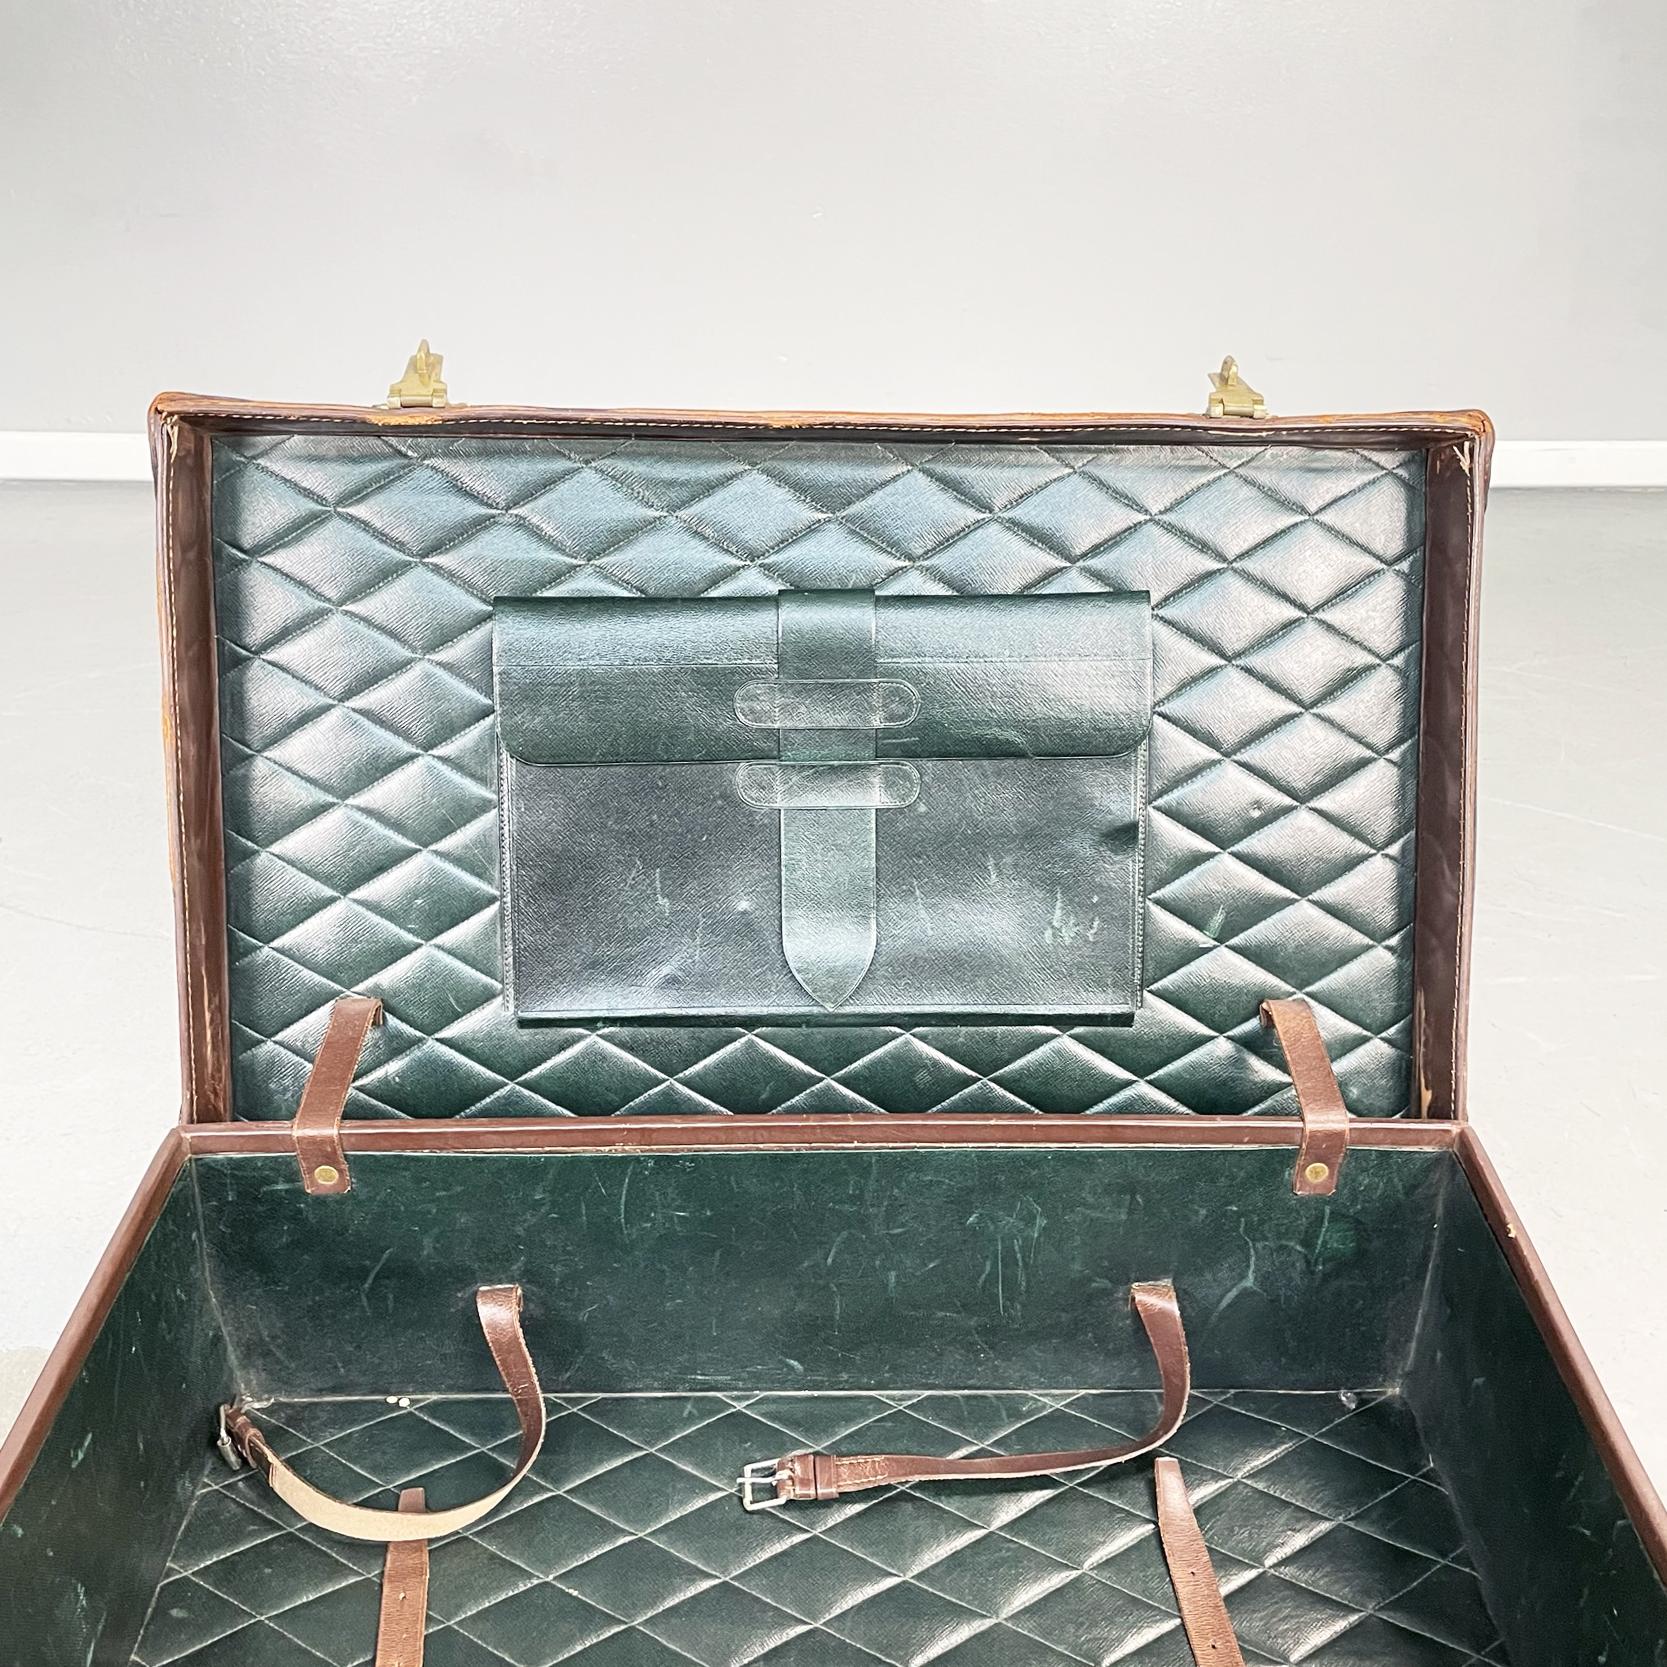 Italian Mid-Century Modern Luggage in Brown and Green Leather, 1970s For Sale 8